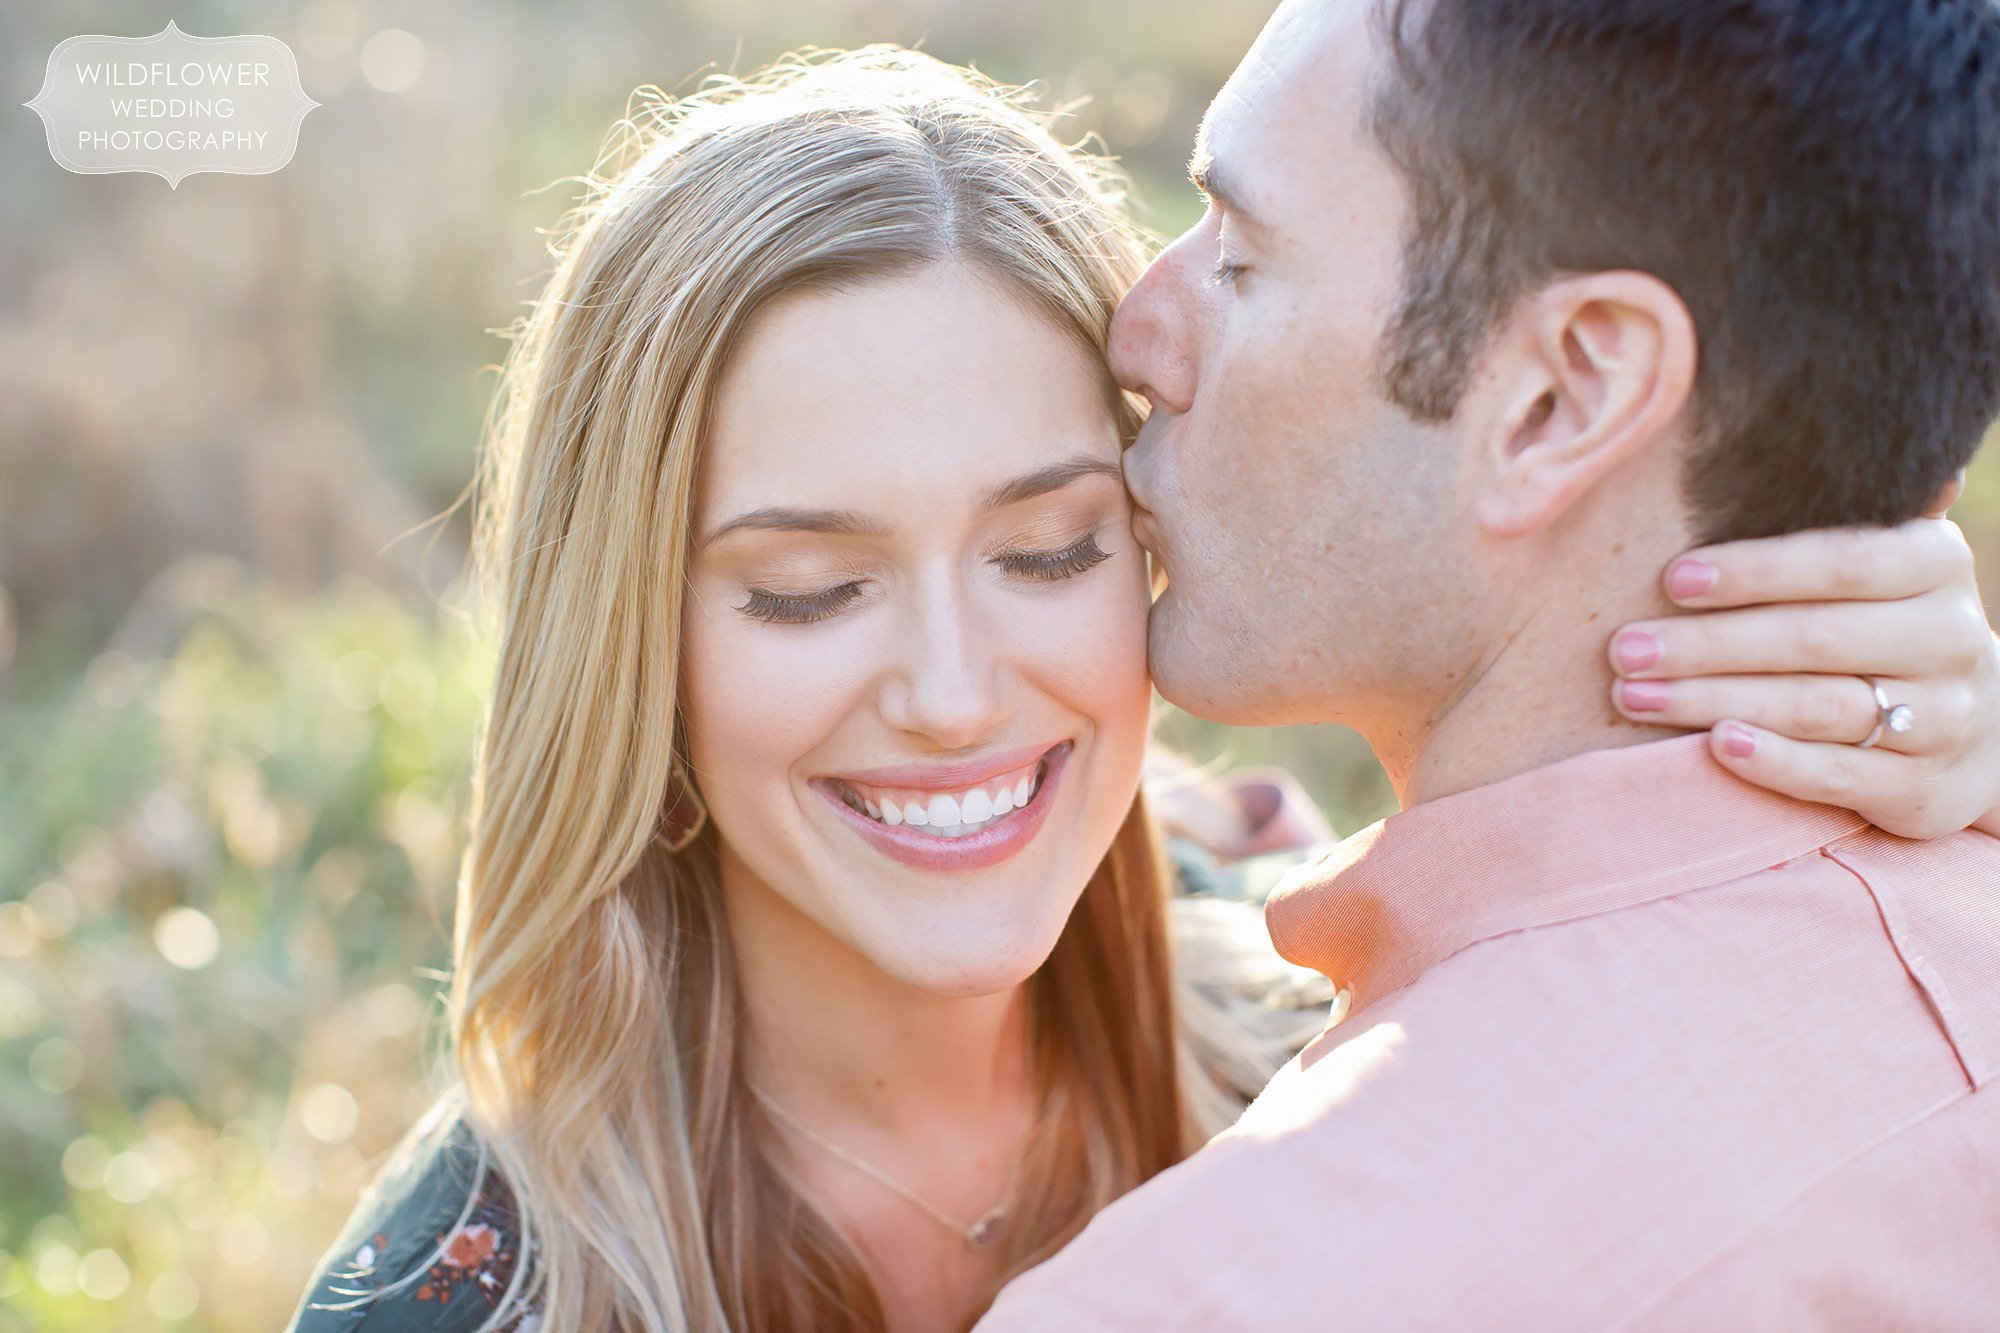 Anthropologie engagement photography pose with guy kissing girl on the cheek in sunbursty light at Grindstone Park.